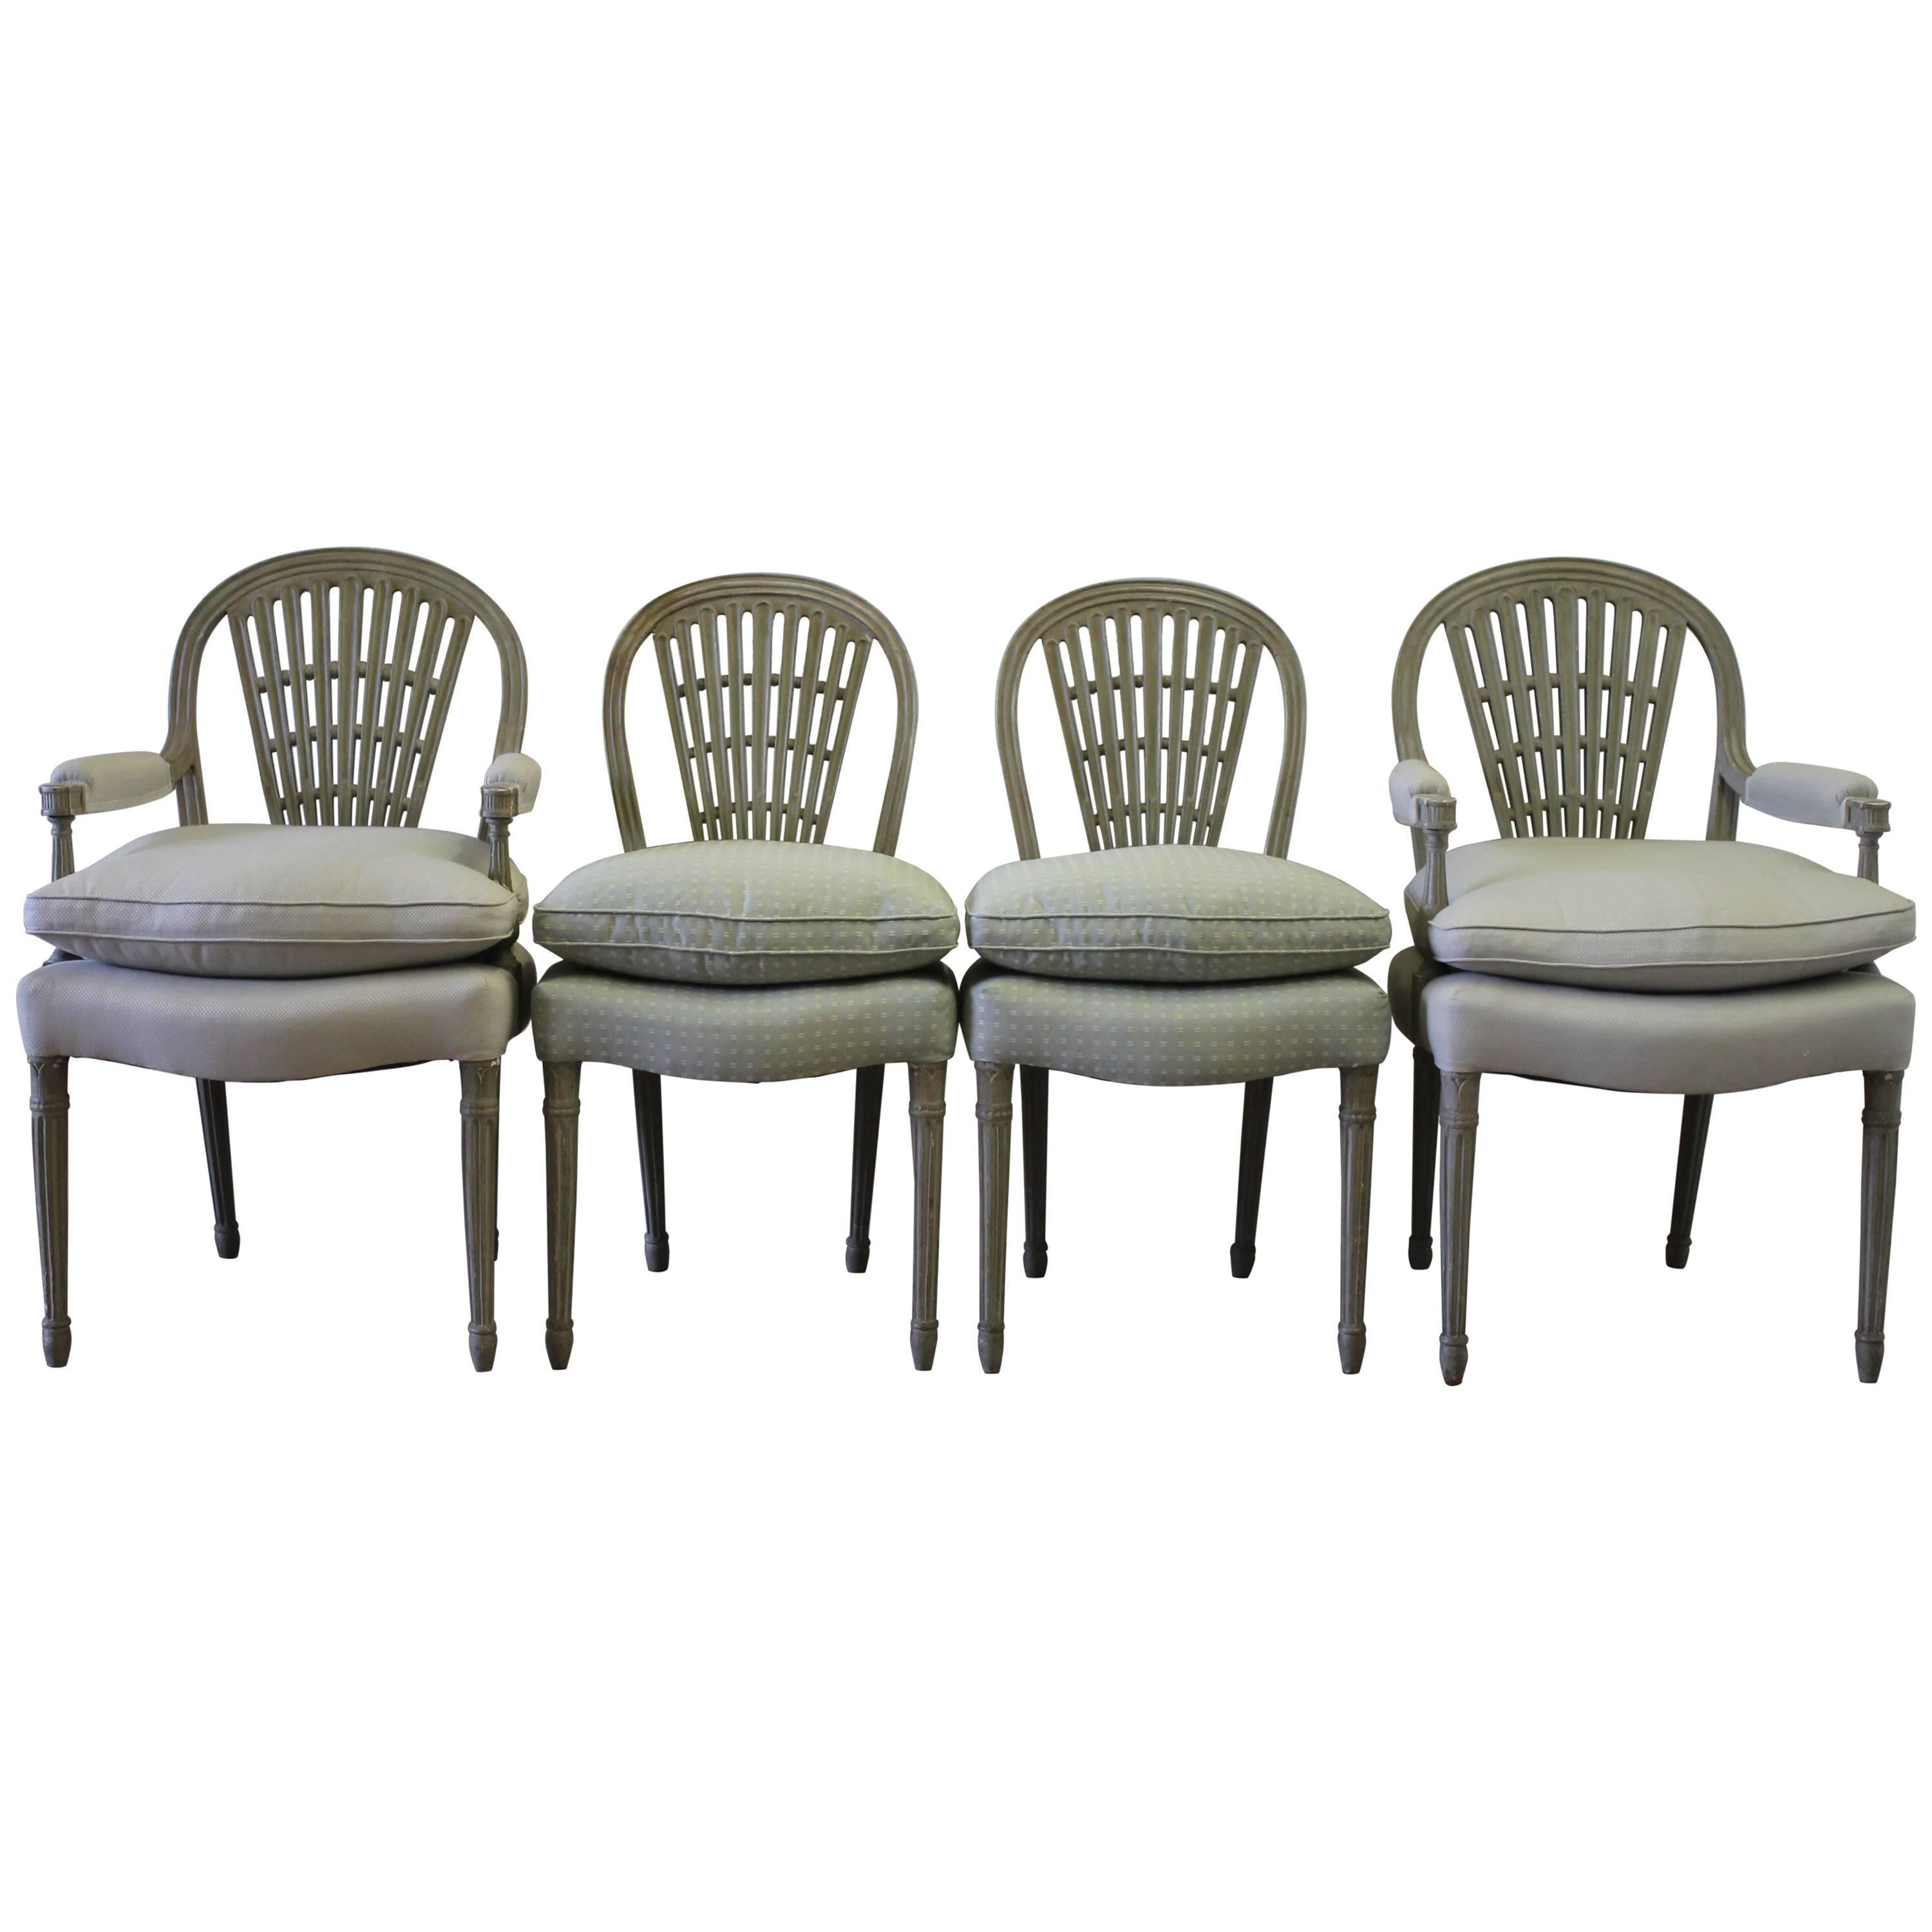 Early 19th Century Painted Upholstered Wheatsheaf Style Gustavian Dining Chairs